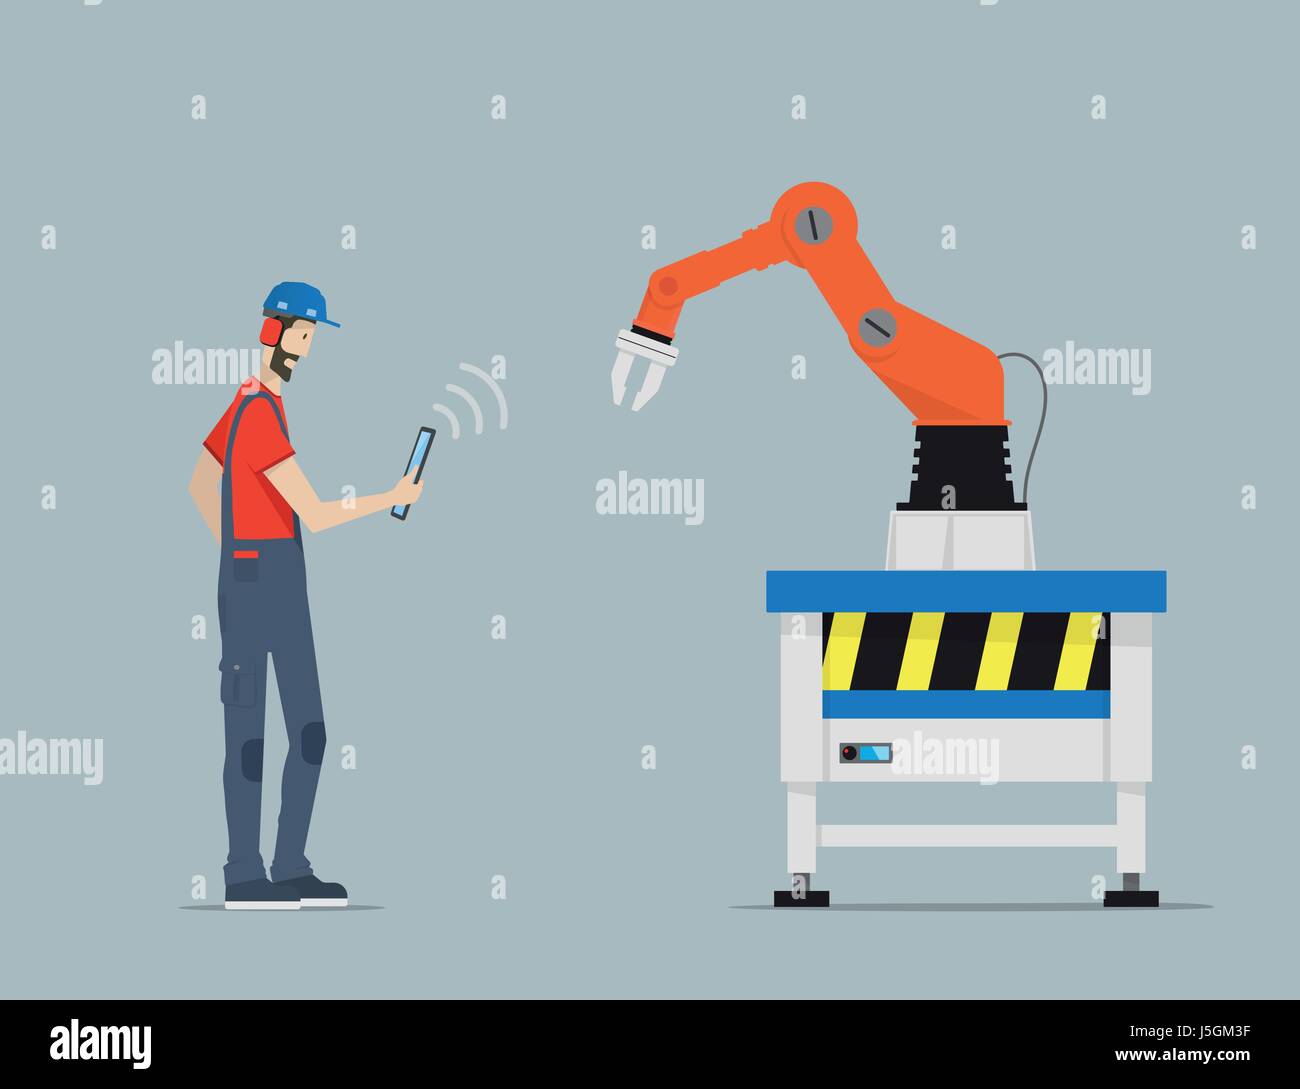 Industry 4.0 Factory Automation Concept. Robot hand controlled by skilled laborer with Tablet PC. Stock Vector